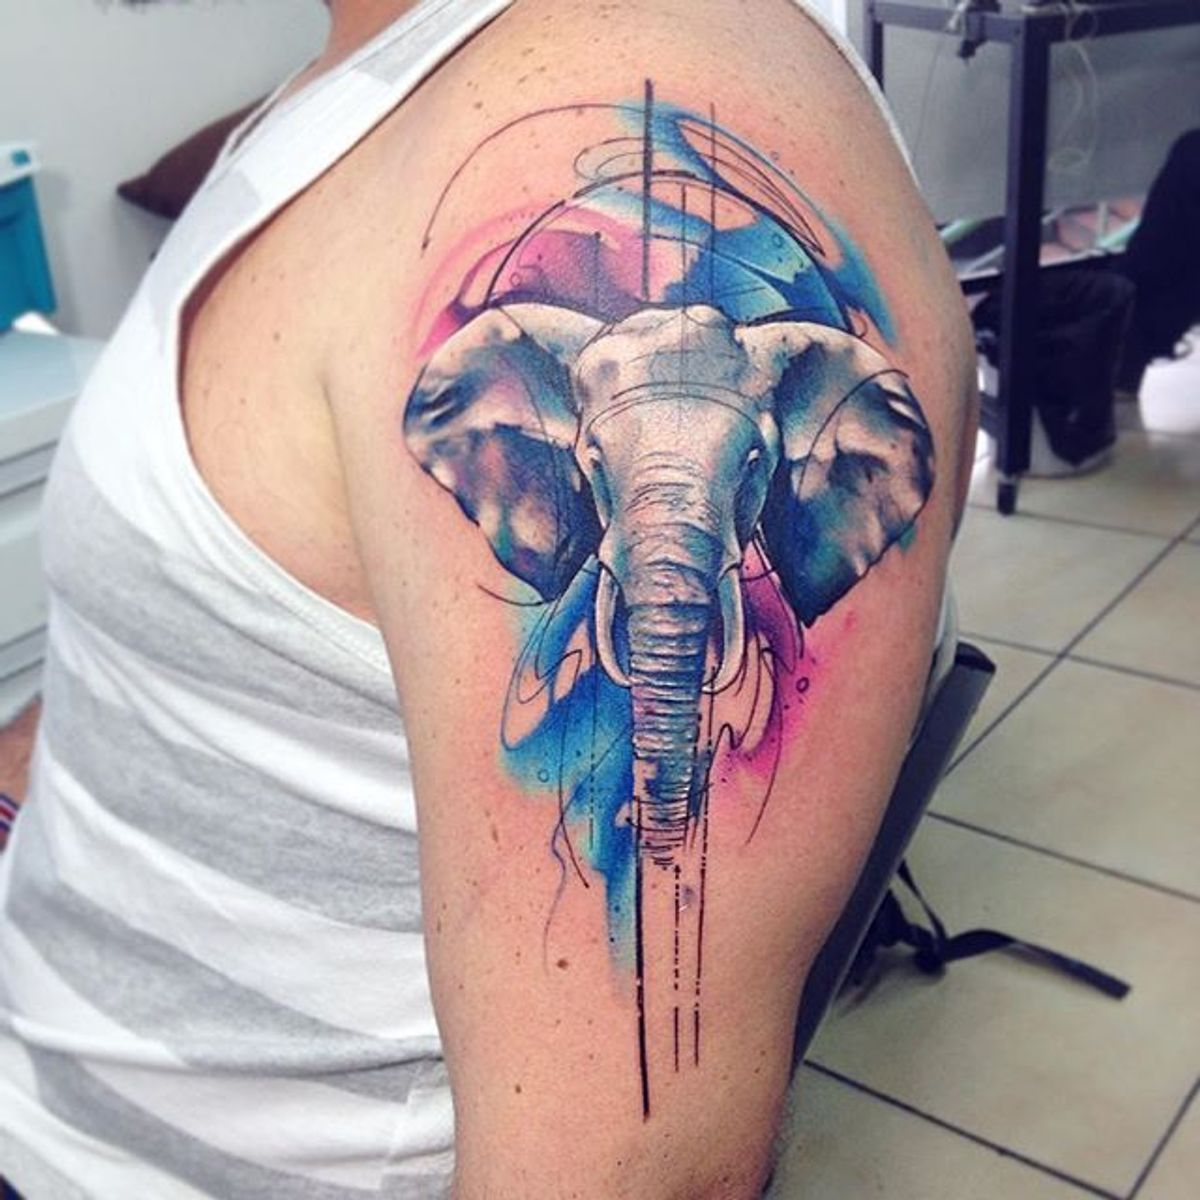 Tattoo uploaded by Robert Davies • Elephant Tattoo by Kathryn Ursula  #Traditional #TraditionalTattoos #OldSchool #KathrynUrsula #elephant •  Tattoodo